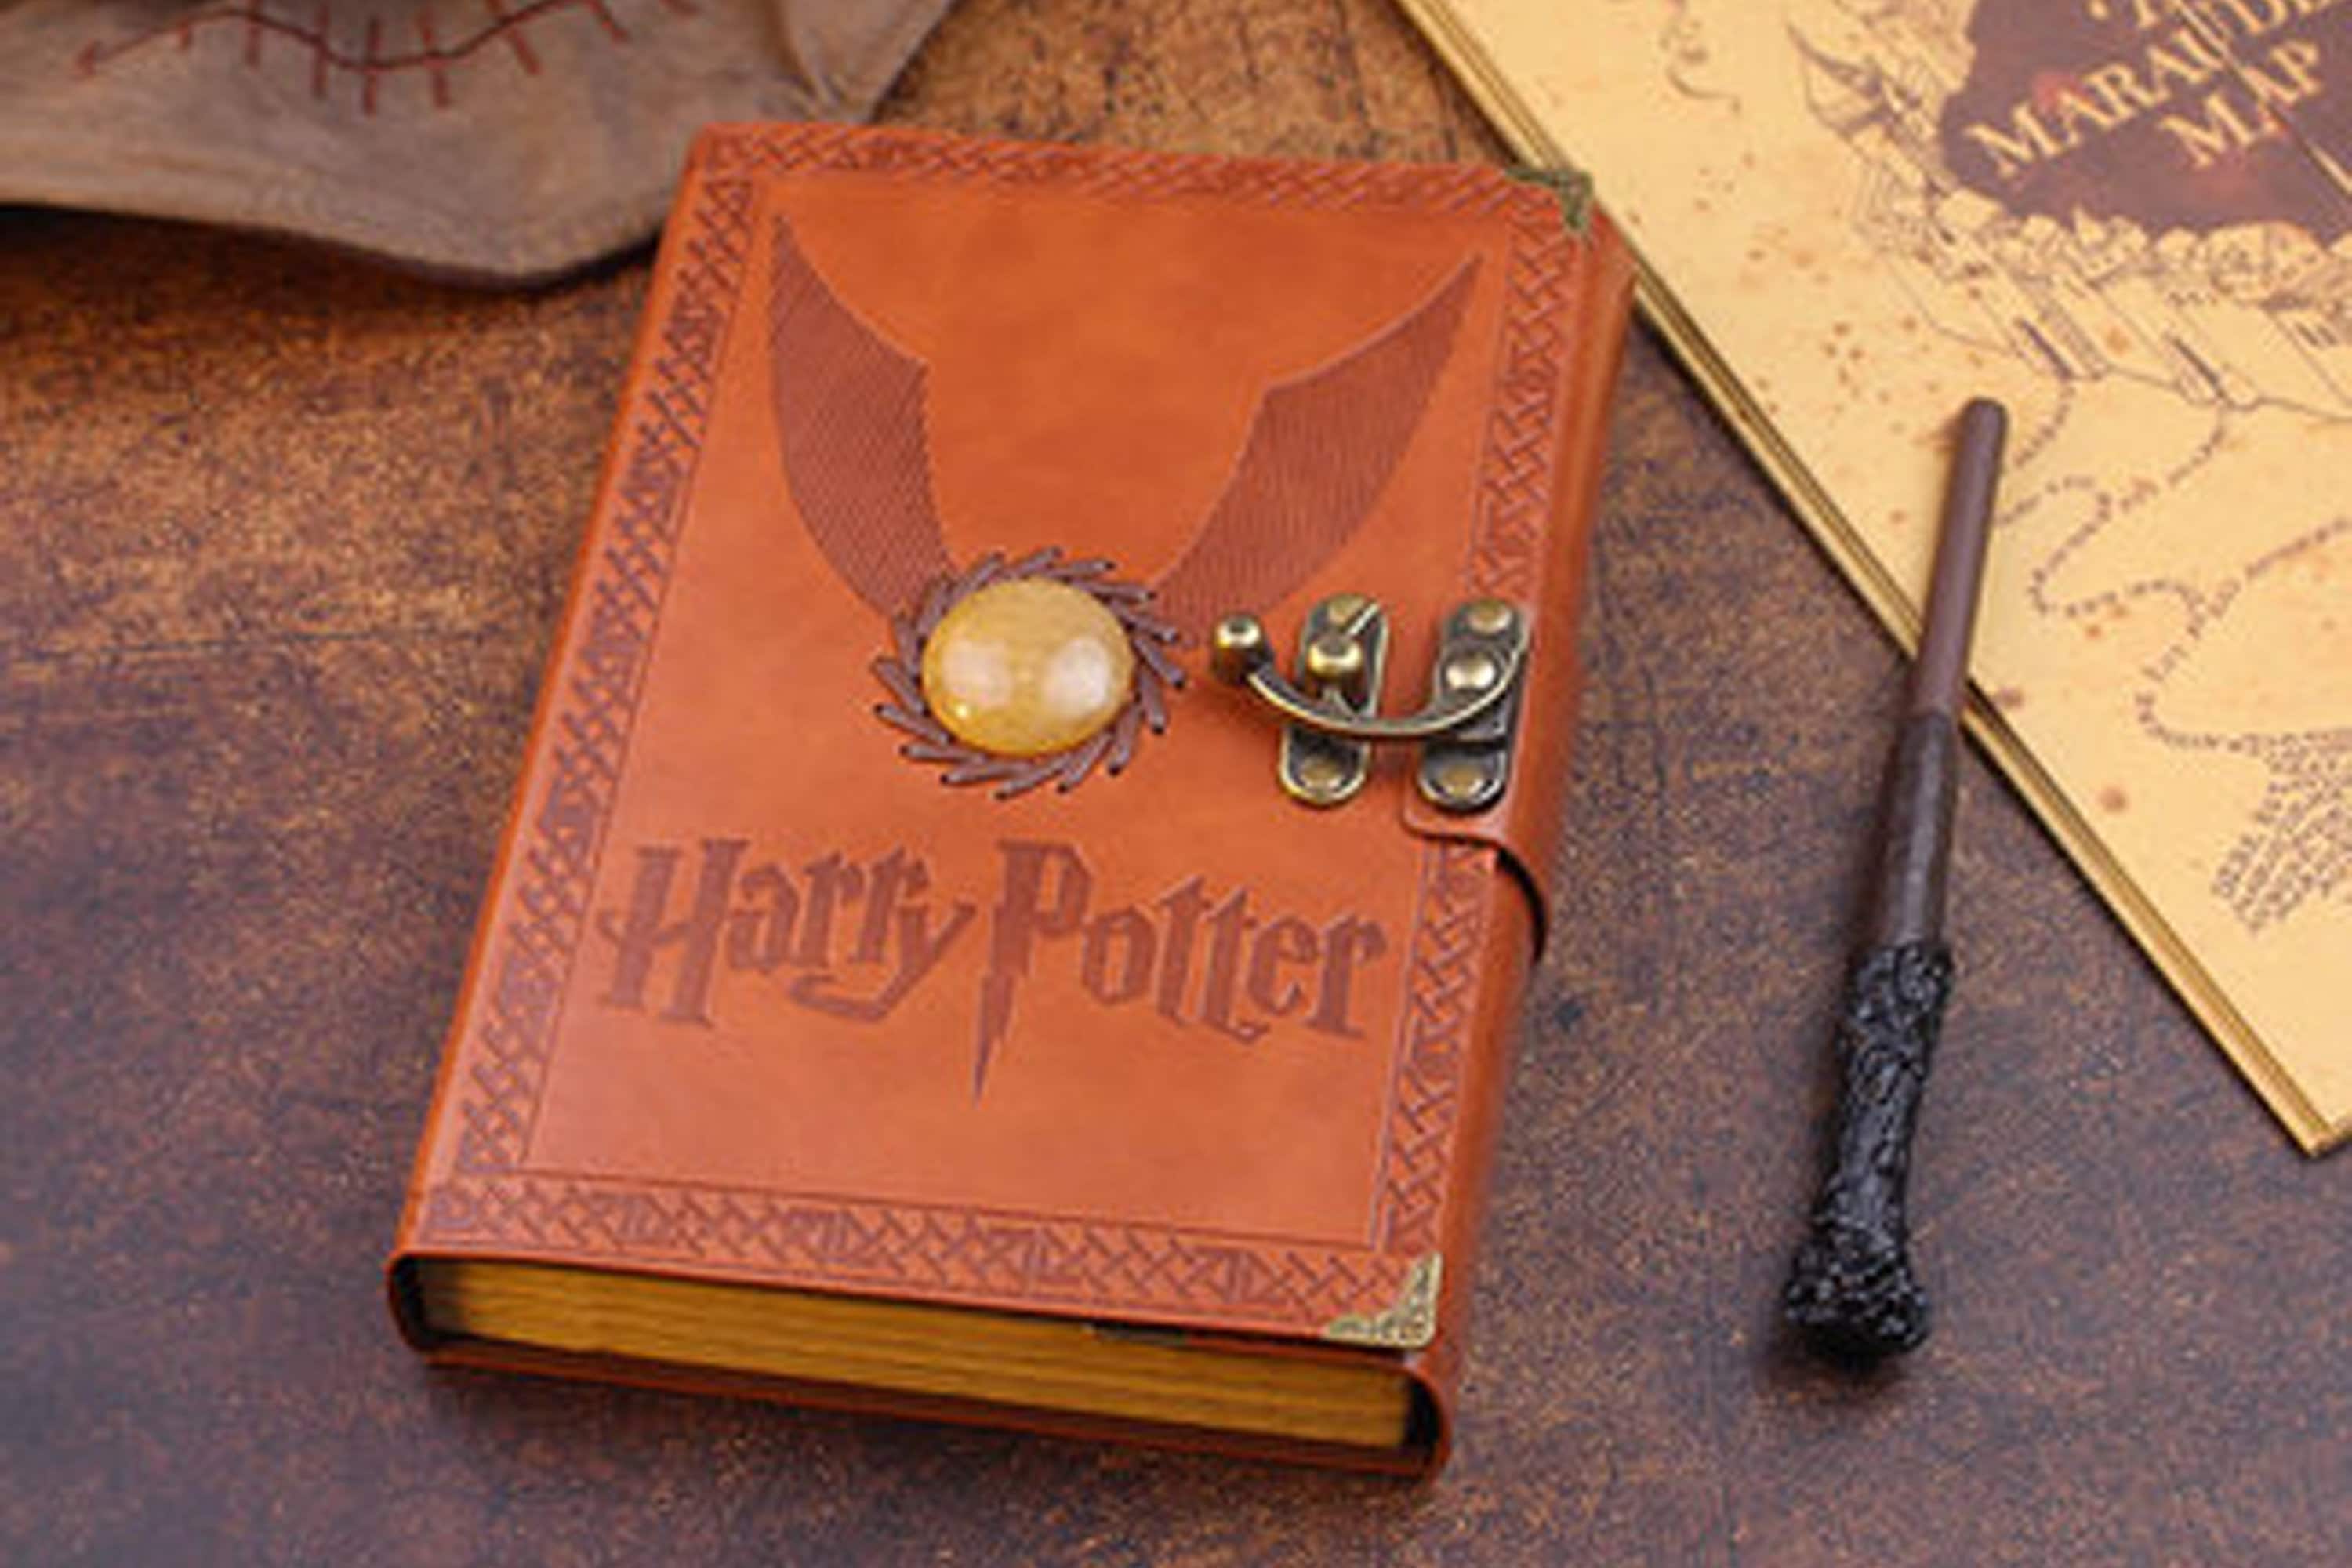 Harry Potter Golden Snitch Notebook Hogwarts School of Witchcraft